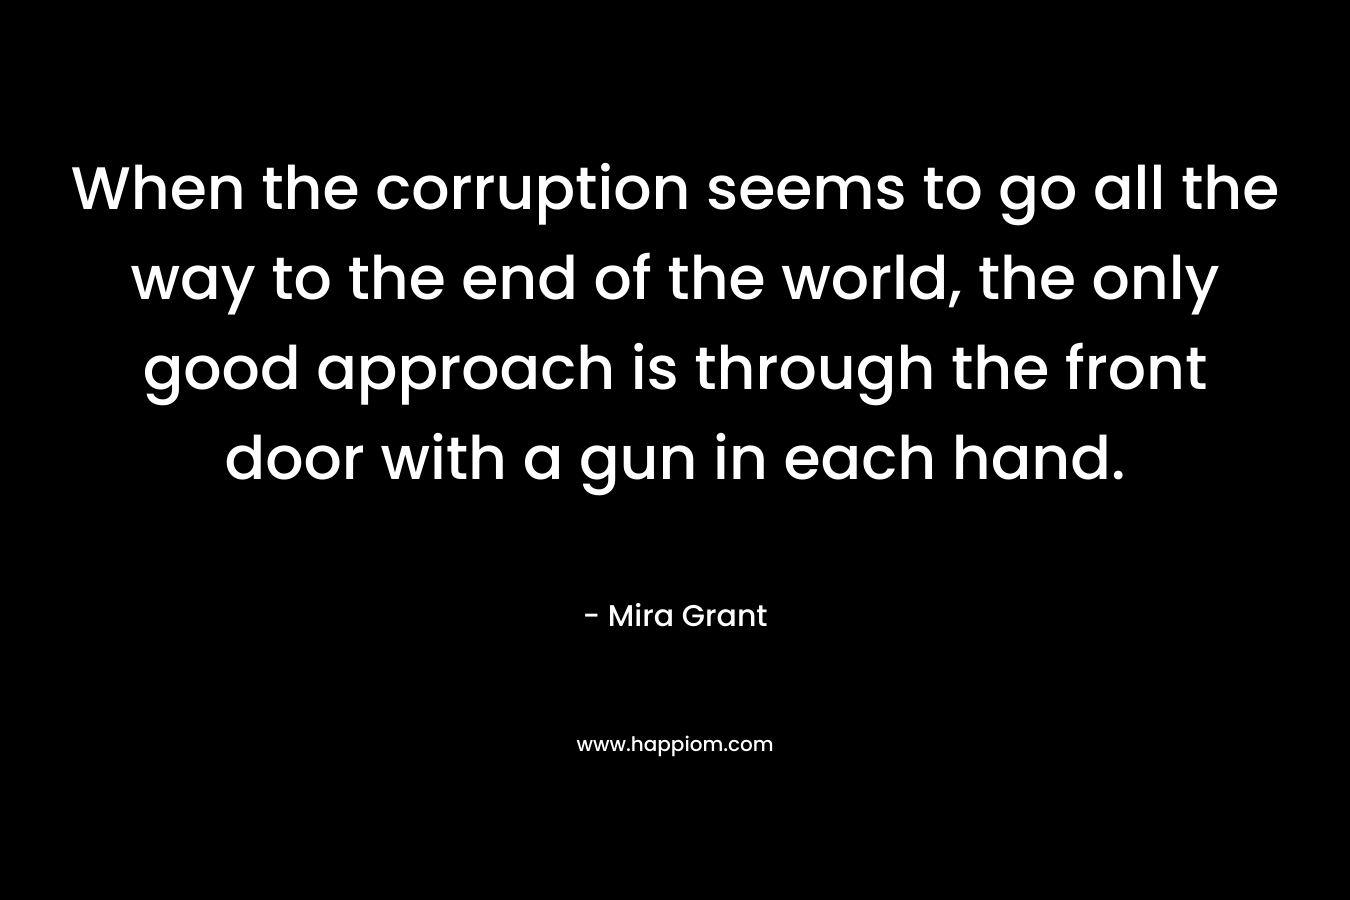 When the corruption seems to go all the way to the end of the world, the only good approach is through the front door with a gun in each hand. – Mira Grant